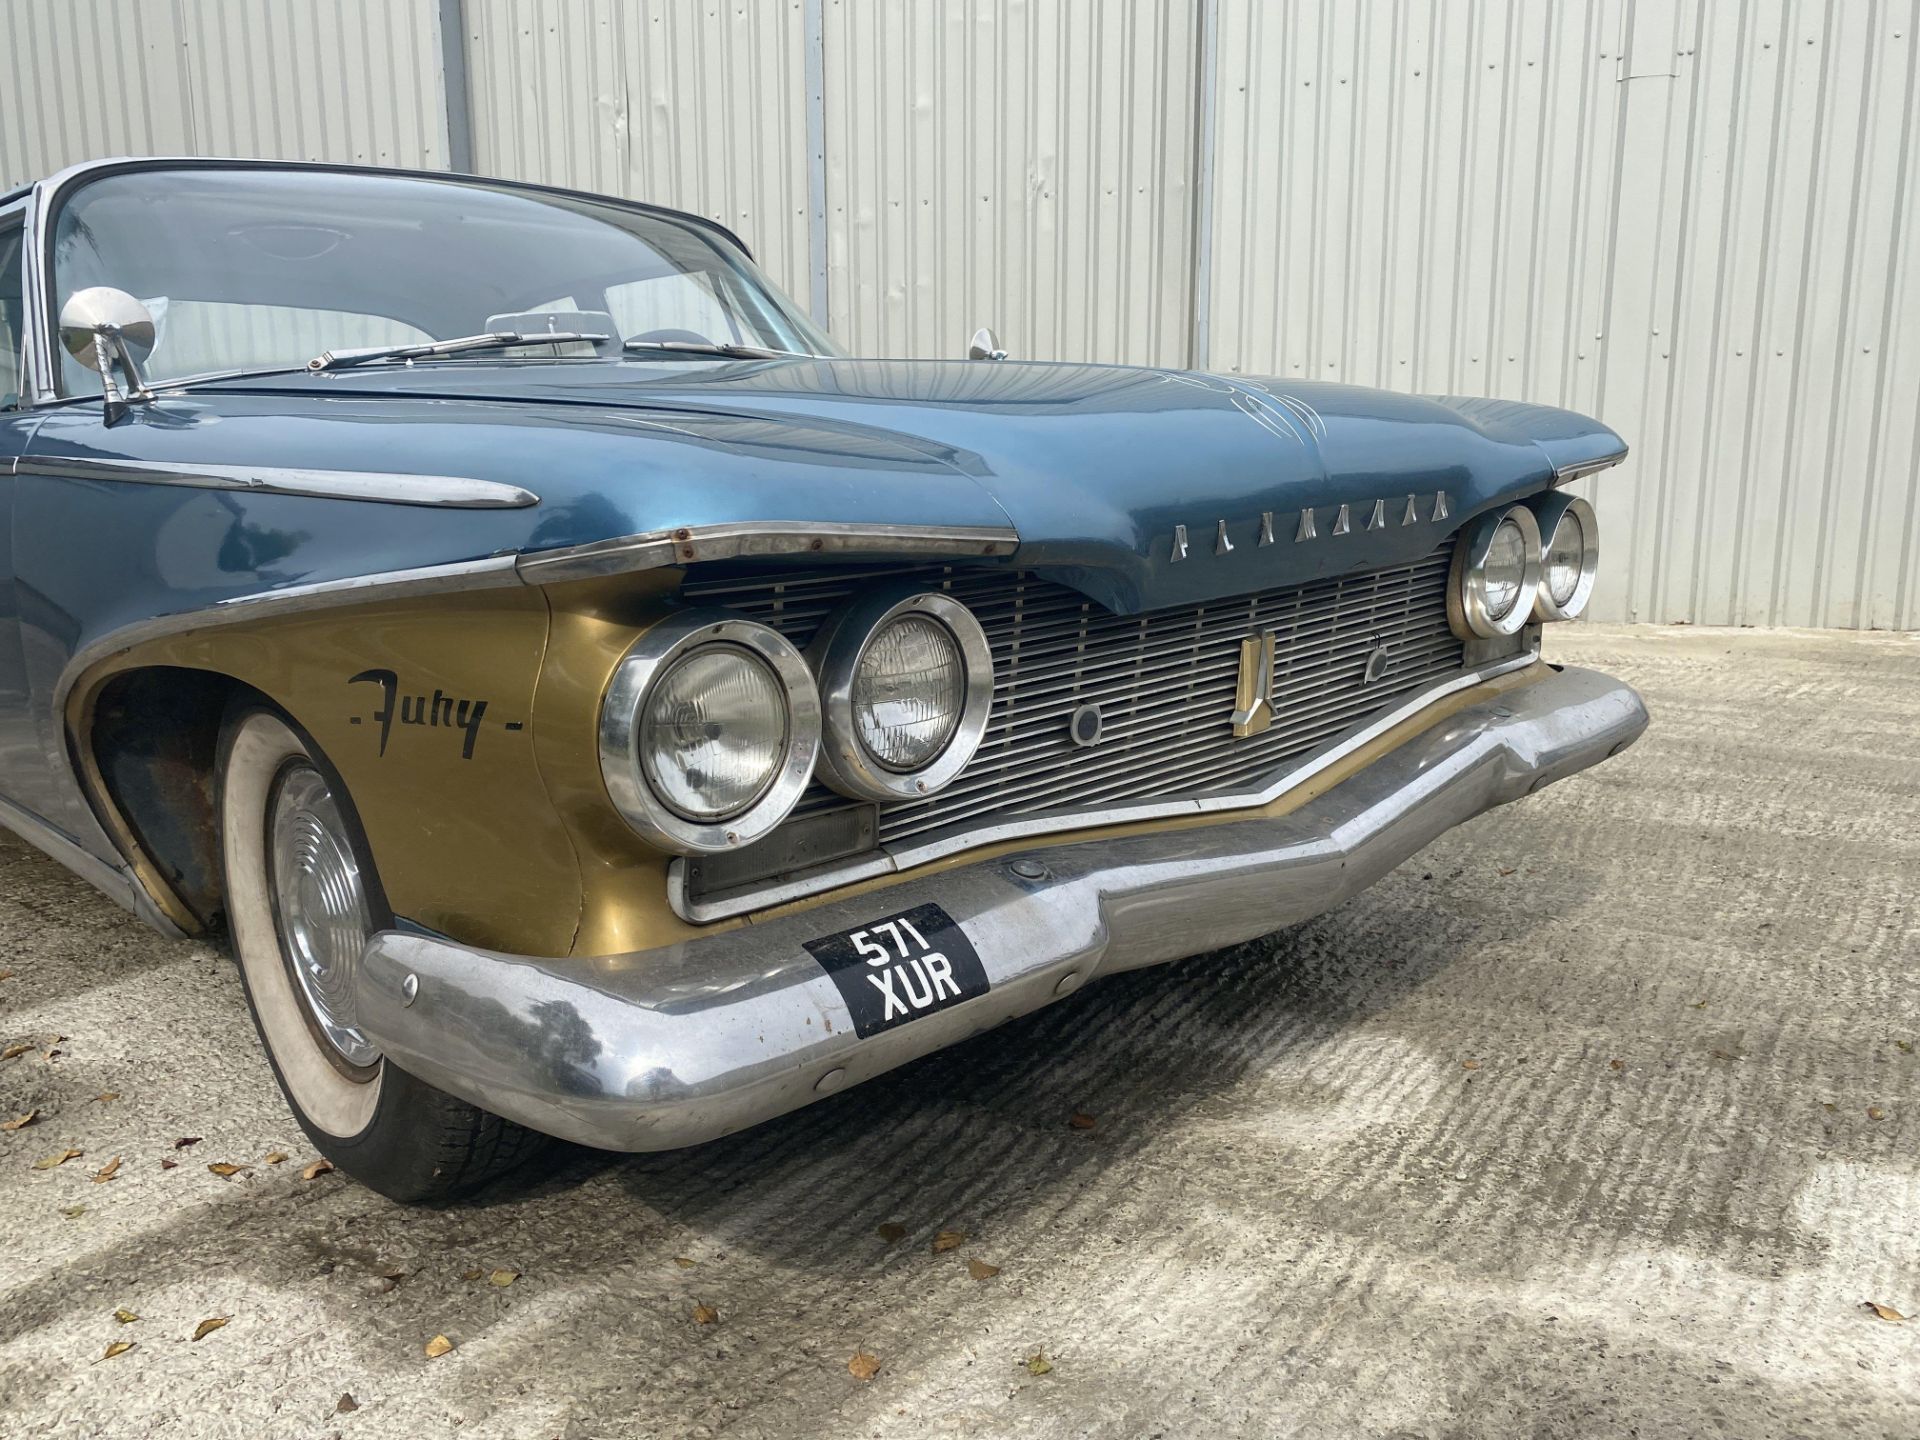 Plymouth Fury - Image 20 of 41